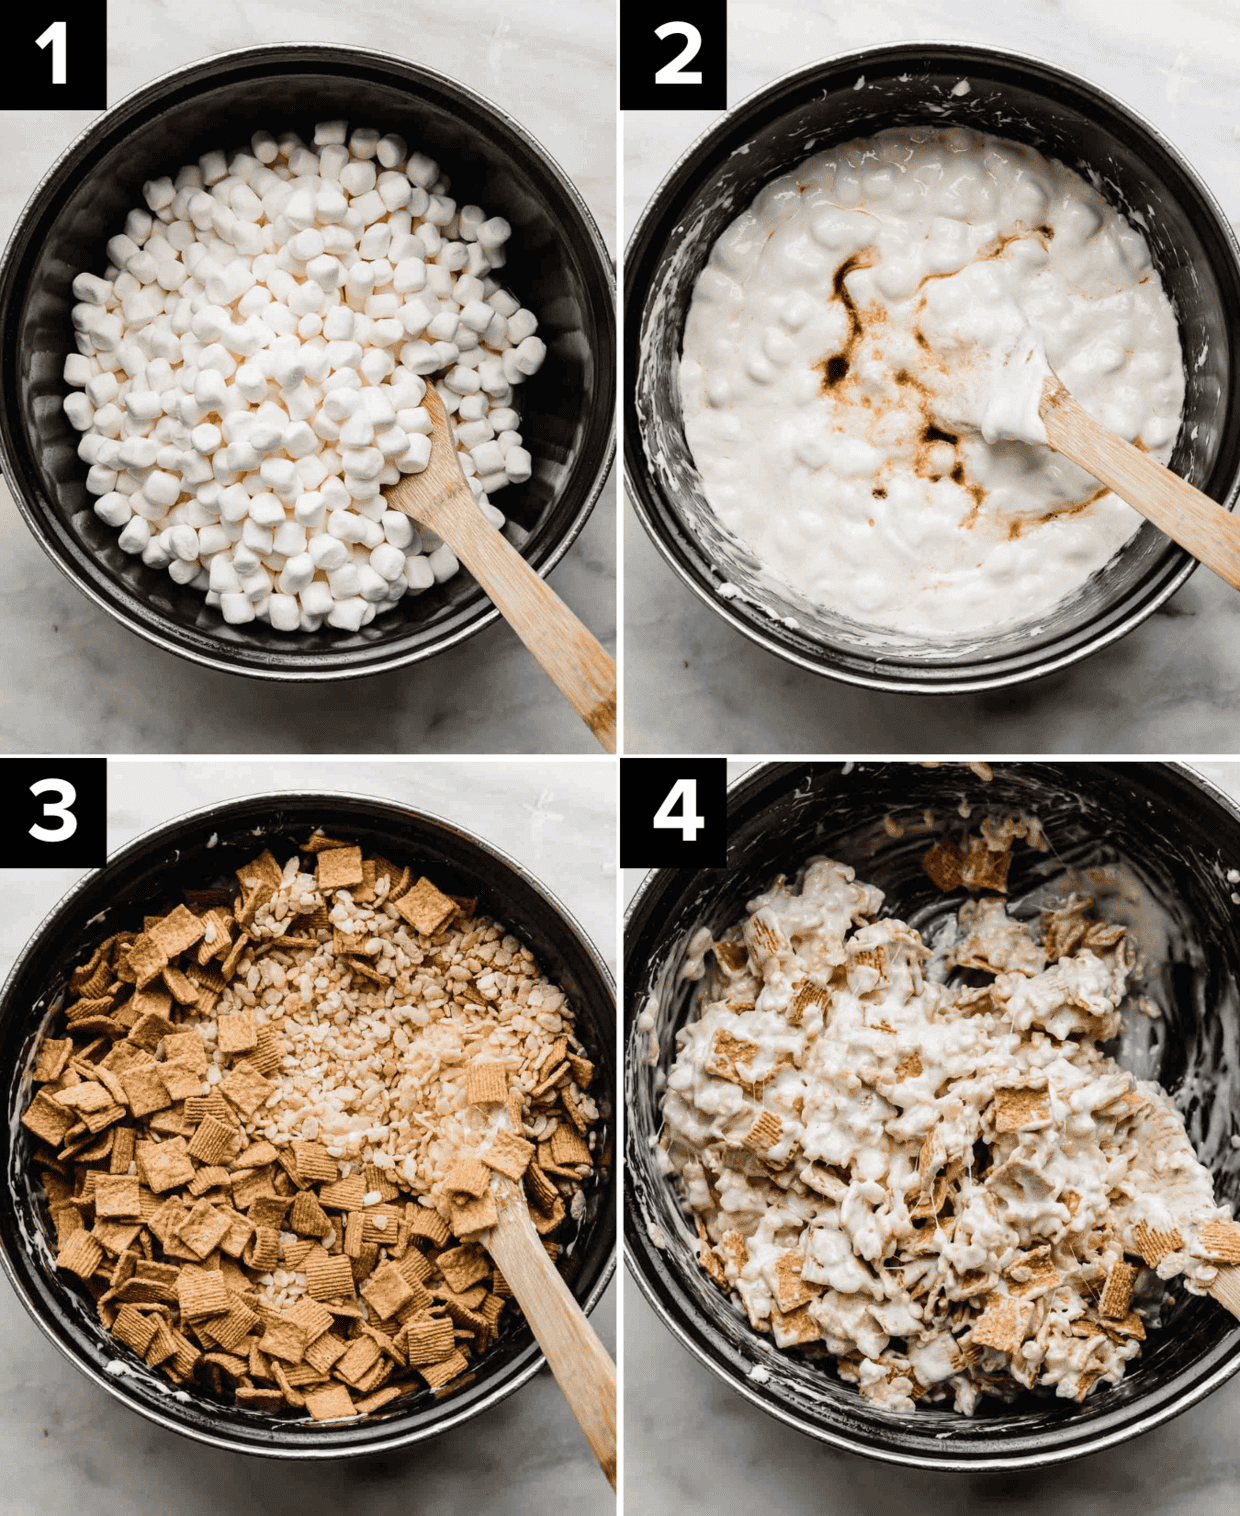 Four images showing how to make S'mores Rice Krispie Treats, top left has black pot with mini mallows in it, top right is melted marshmallow in the pot, bottom left has Golden Grahams and rice krispies in the pot, bottom right is S'more Rice Krispie Treats mixture in a pot.